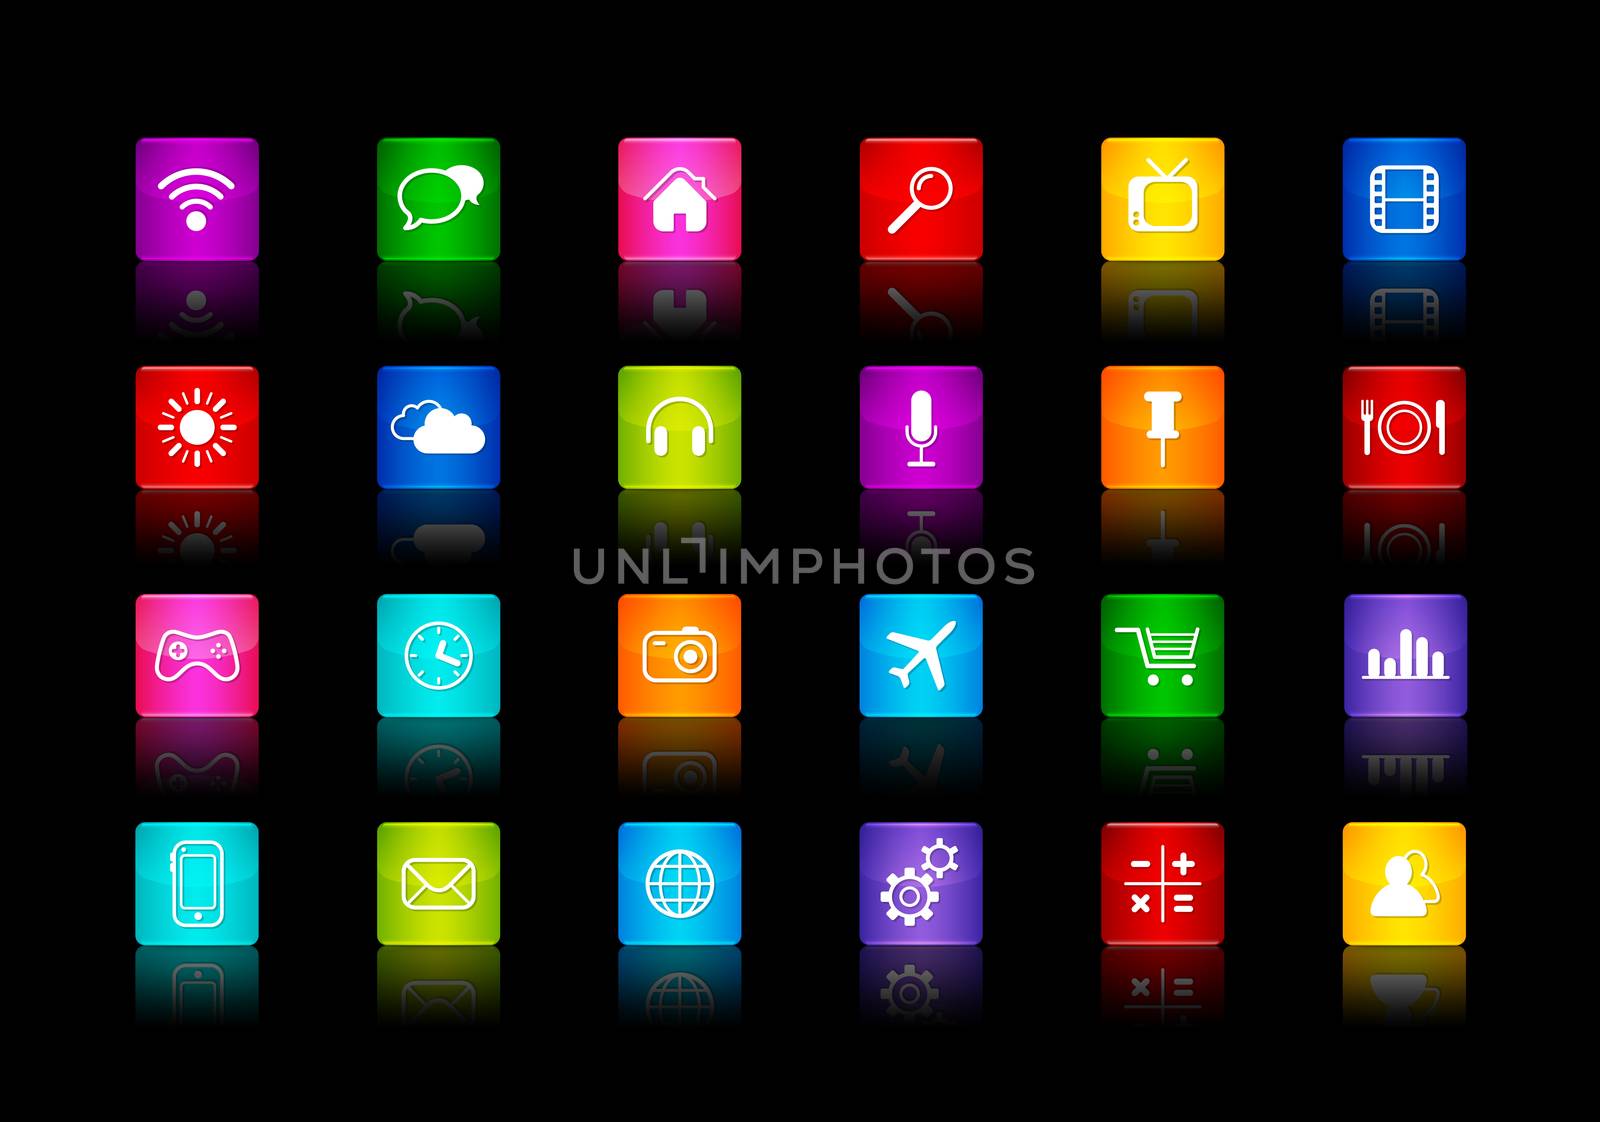 Desktop Icons collection by daboost